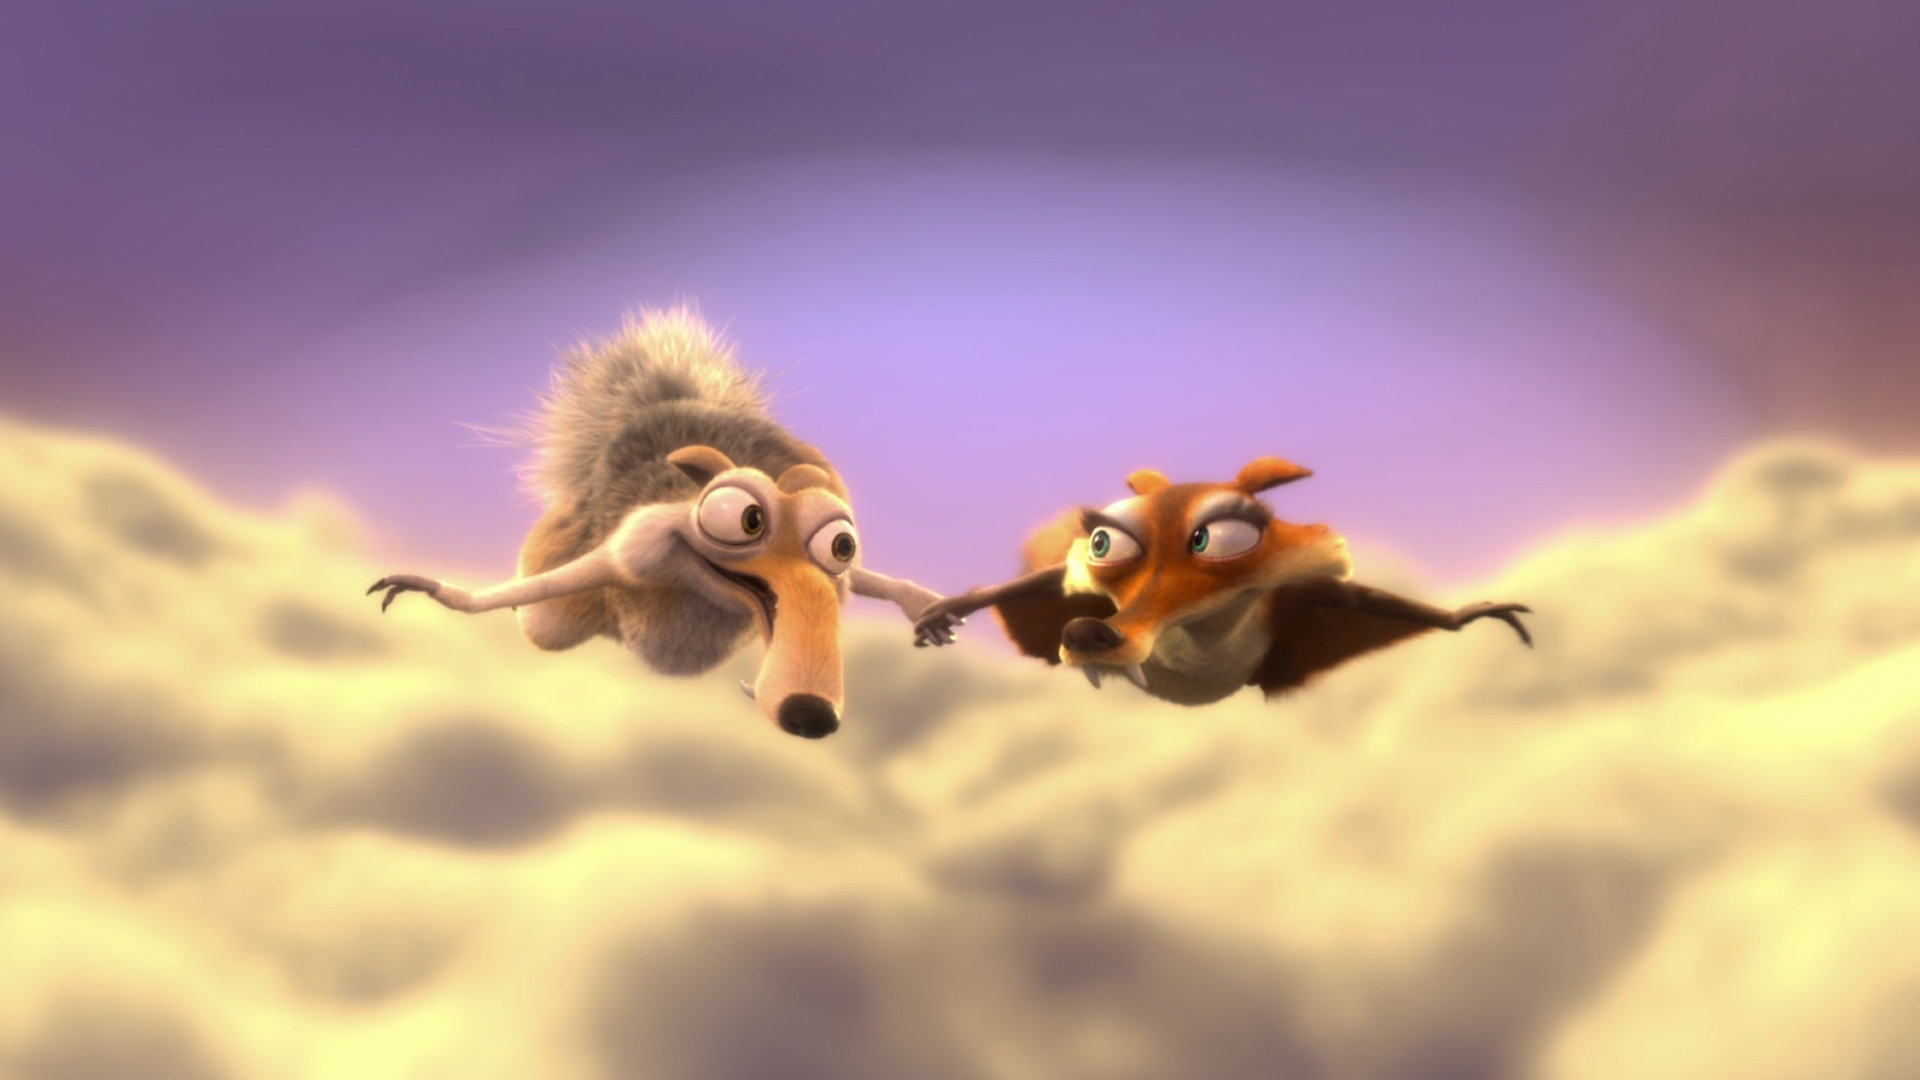 Scrat and Scratte for 1920 x 1080 HDTV 1080p resolution